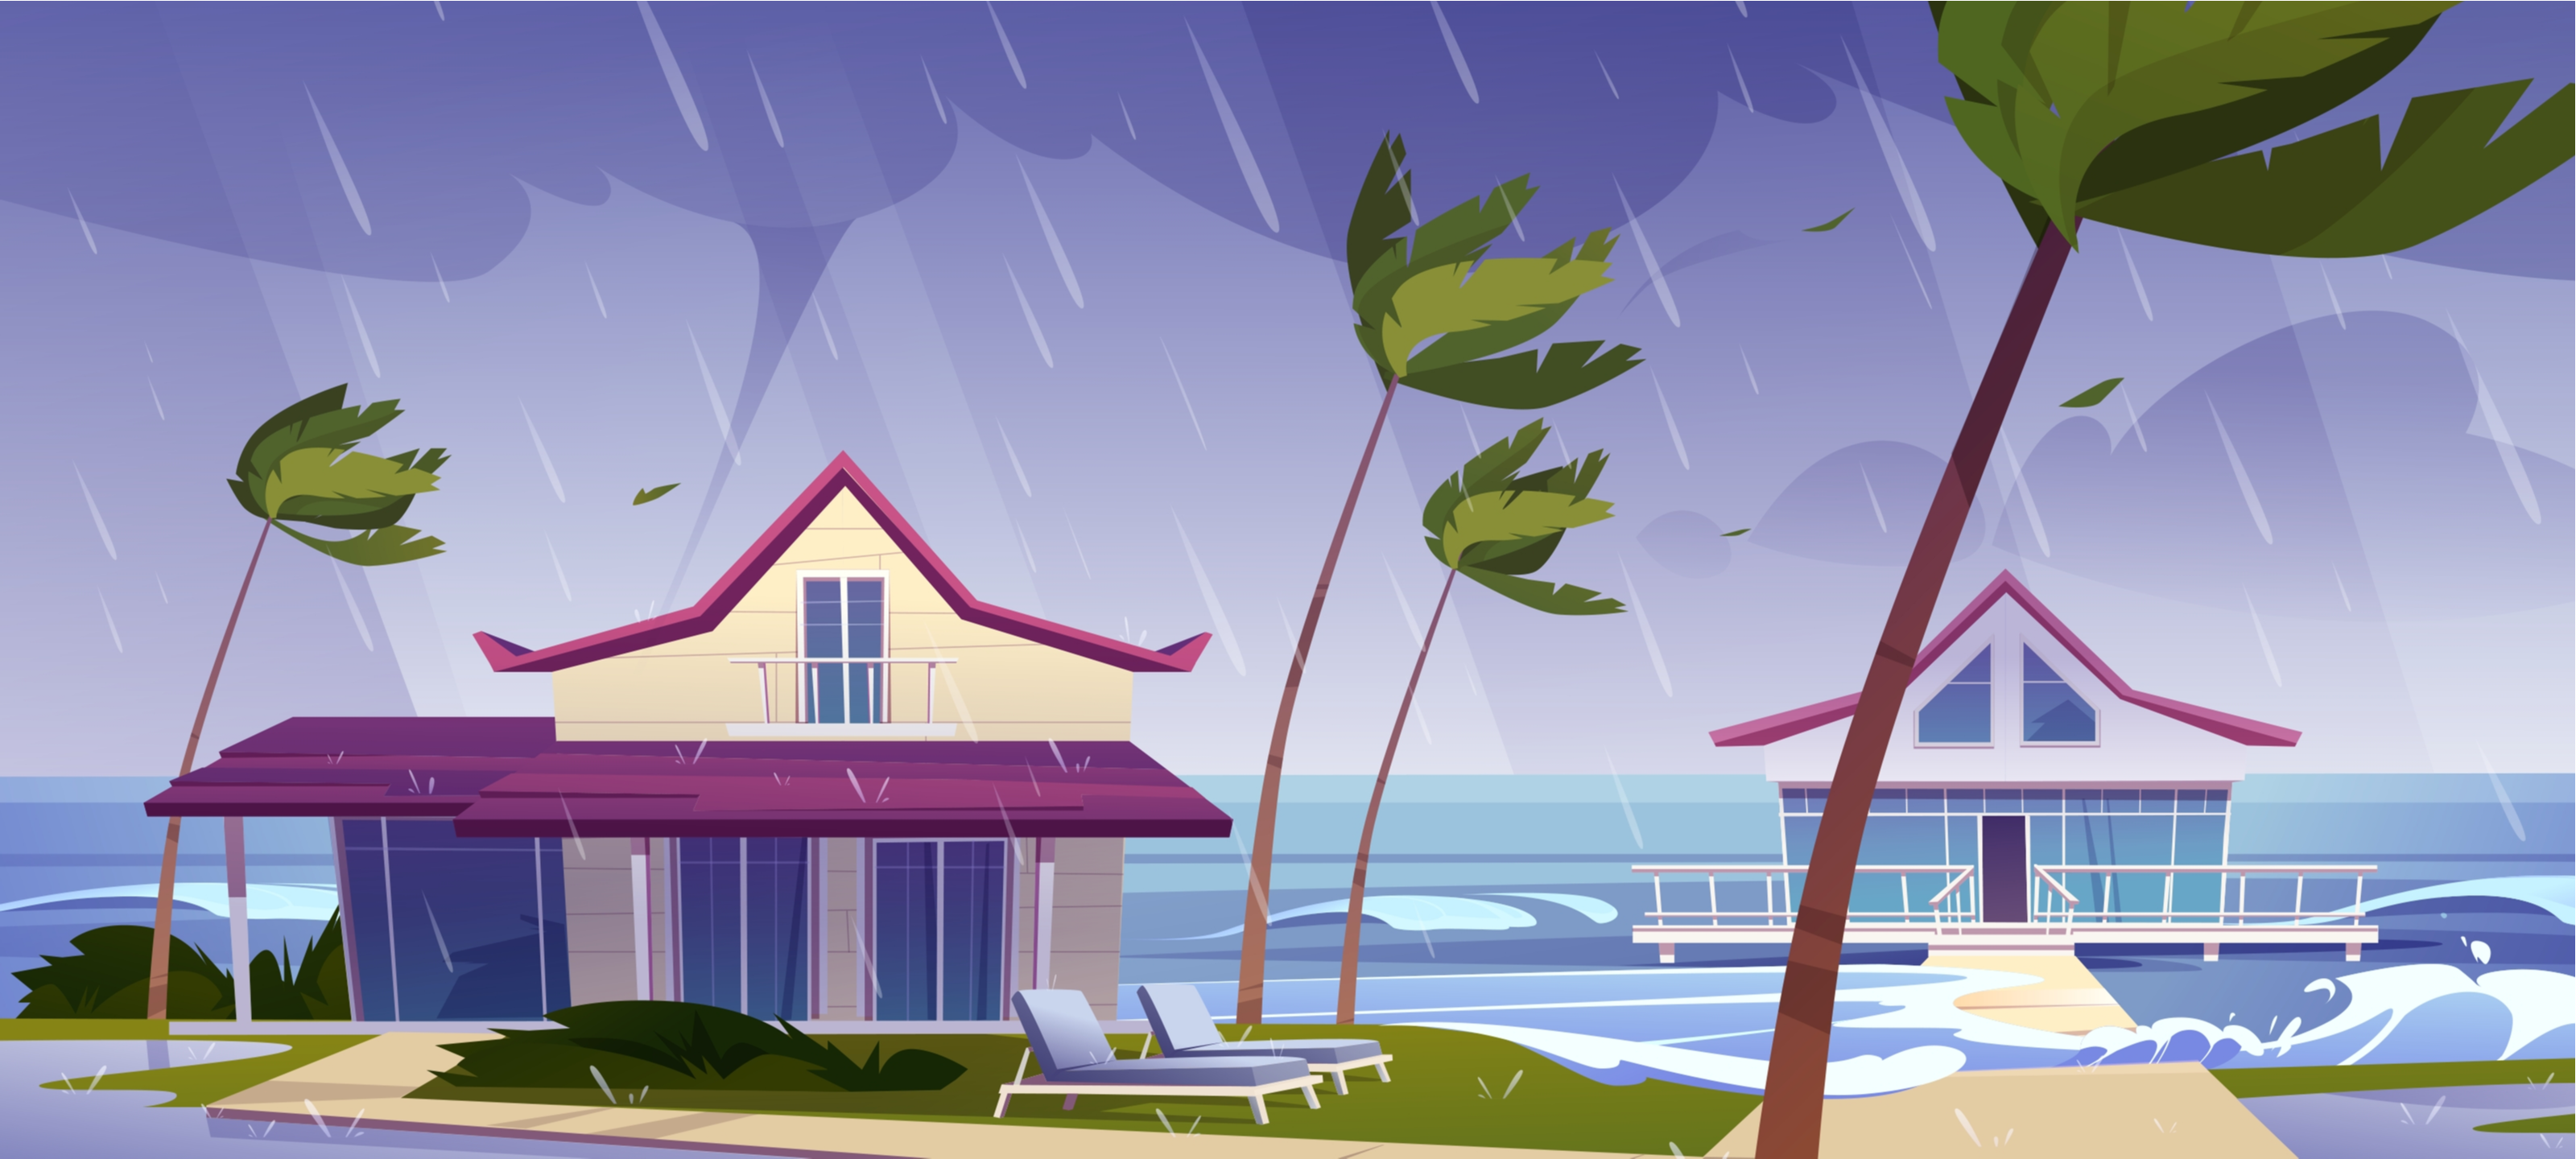 colorful art of 2 ocean villas with 4 palm trees between them. The ocean is stormy, the palm trees bending as a hurricane is approaching tropical paradise